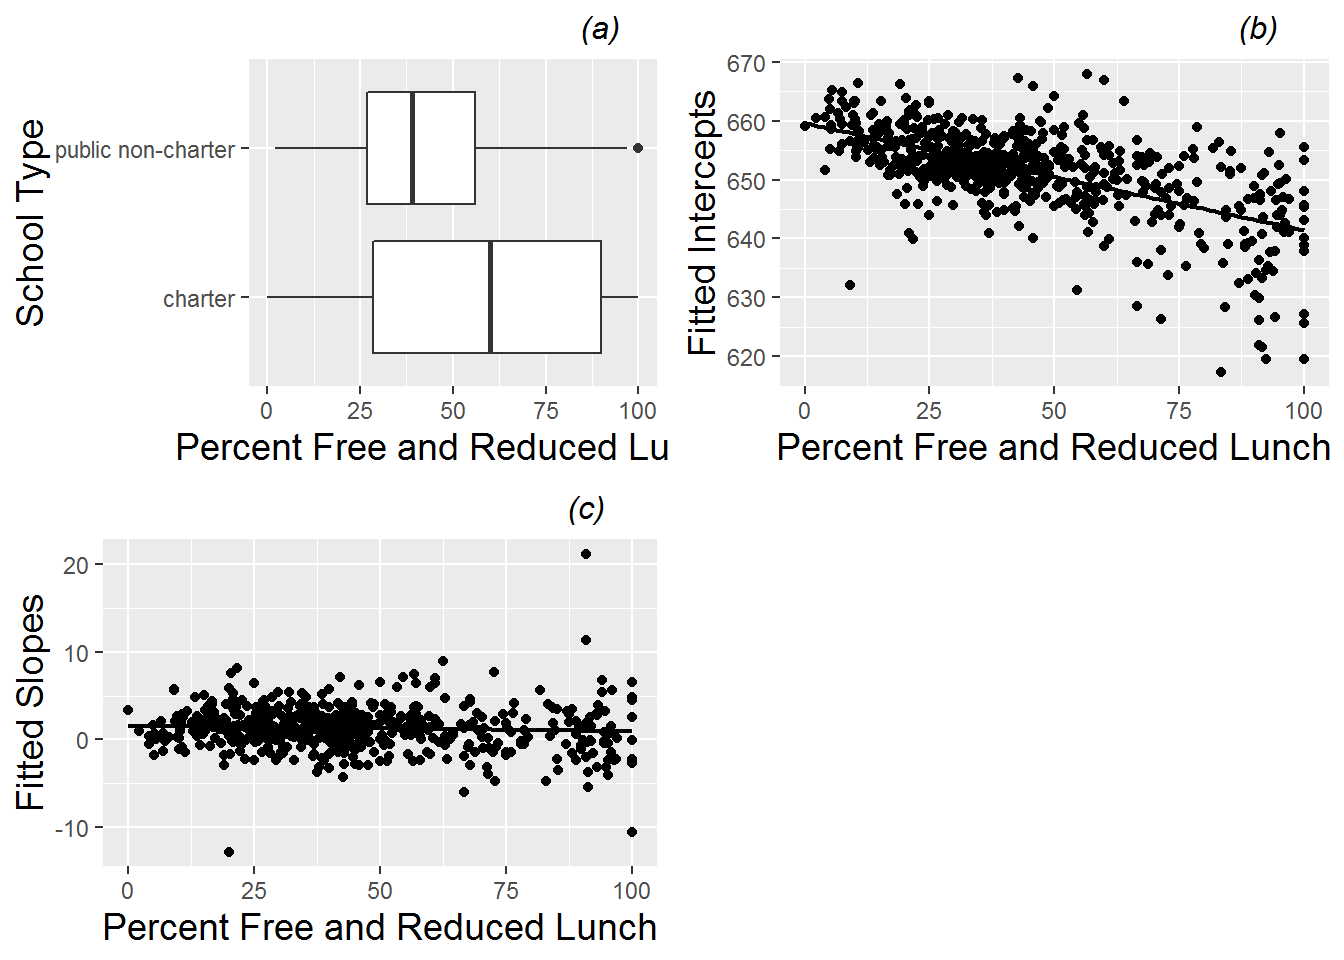 (a) Boxplot of percent free and reduced lunch by school type (charter vs. public non-charter), along with scatterplots of (b) intercepts and (c) slopes from fitted regression lines by school vs. percent free and reduced lunch.